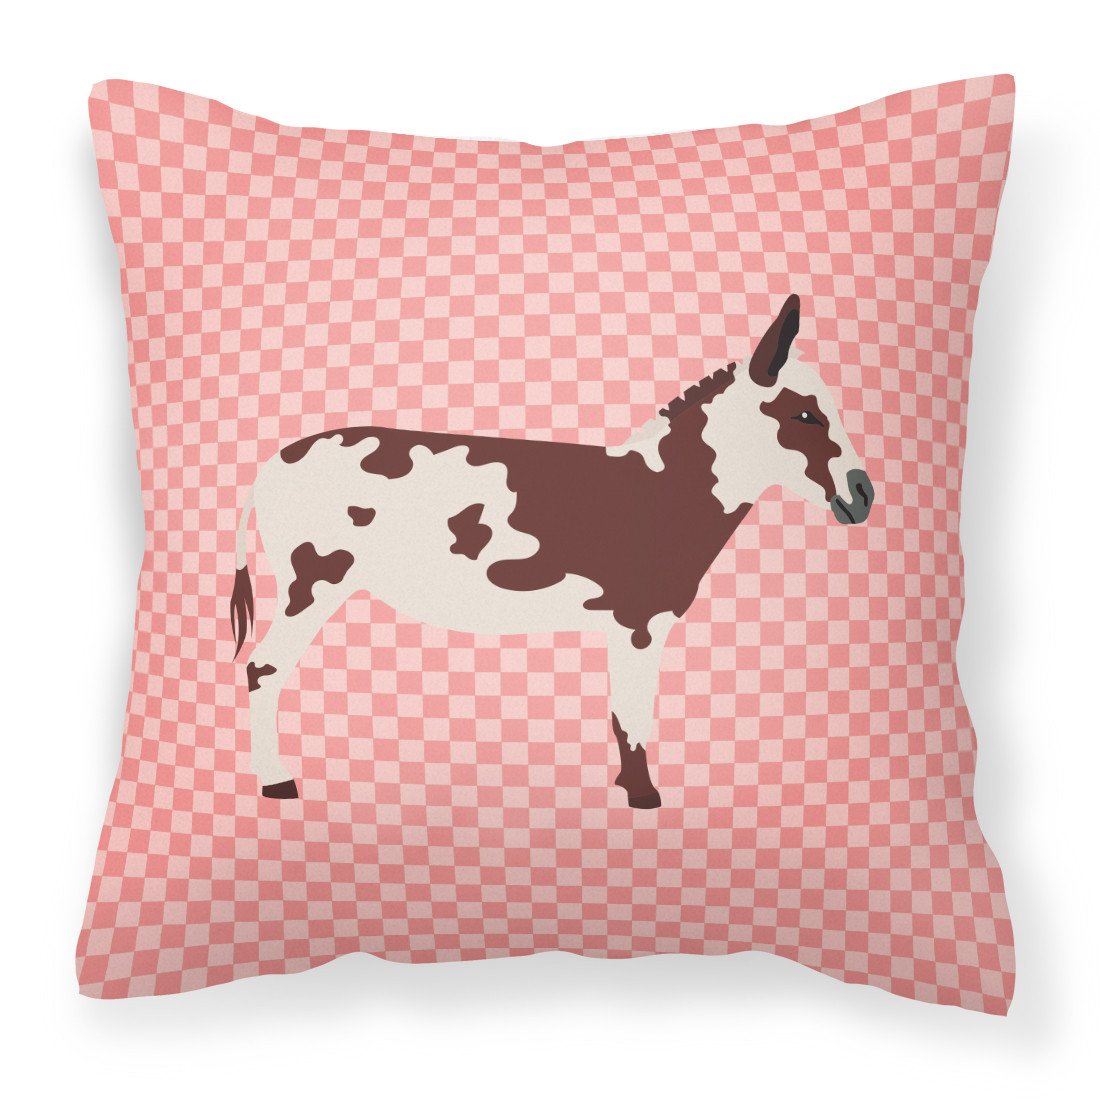 American Spotted Donkey Pink Check Fabric Decorative Pillow BB7851PW1818 by Caroline's Treasures